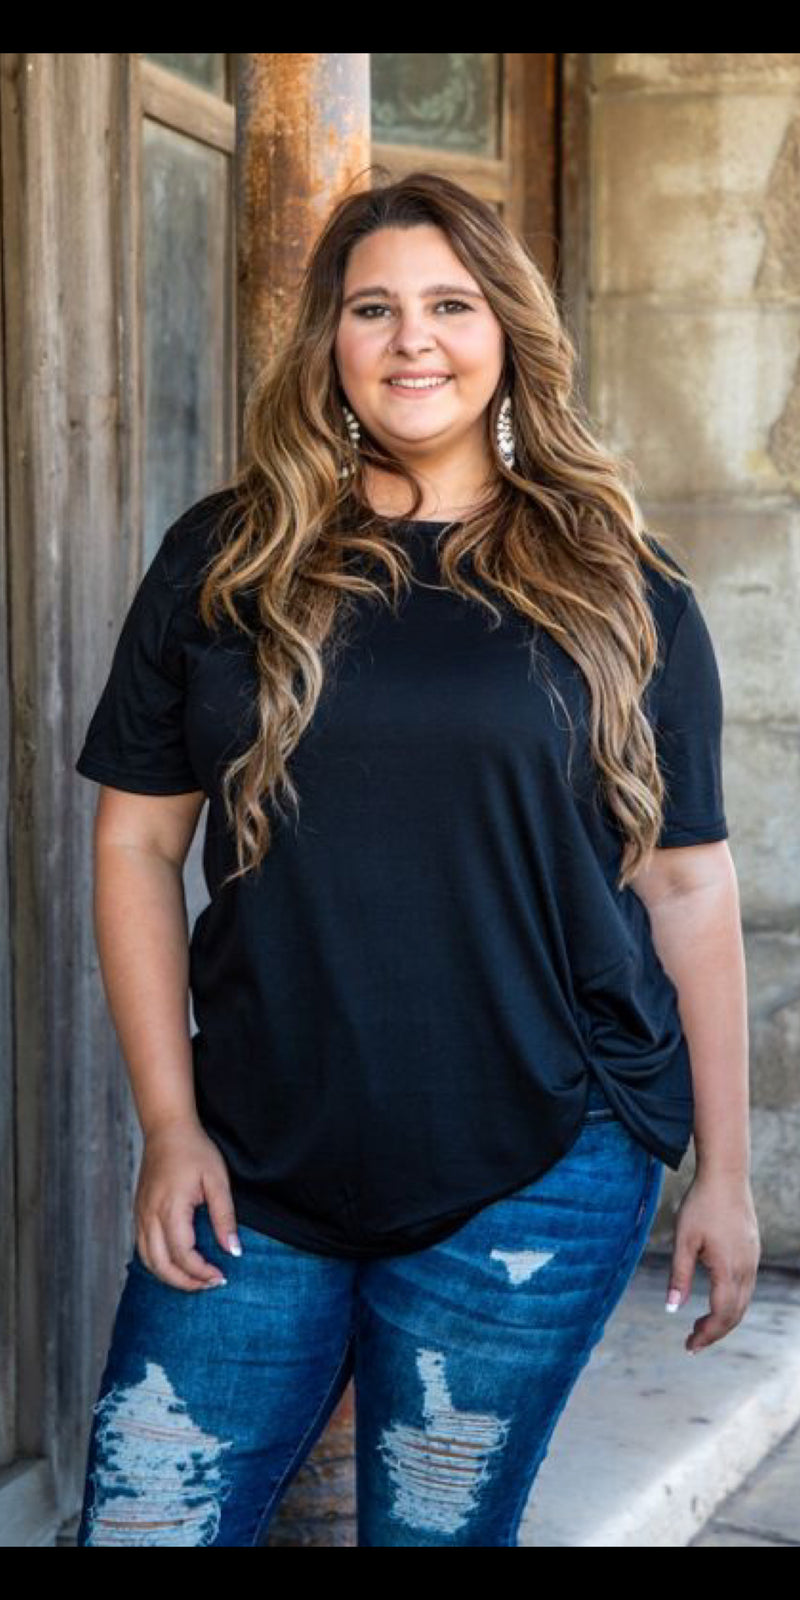 Take it Easy Black Knotty Top - Also in Plus Size